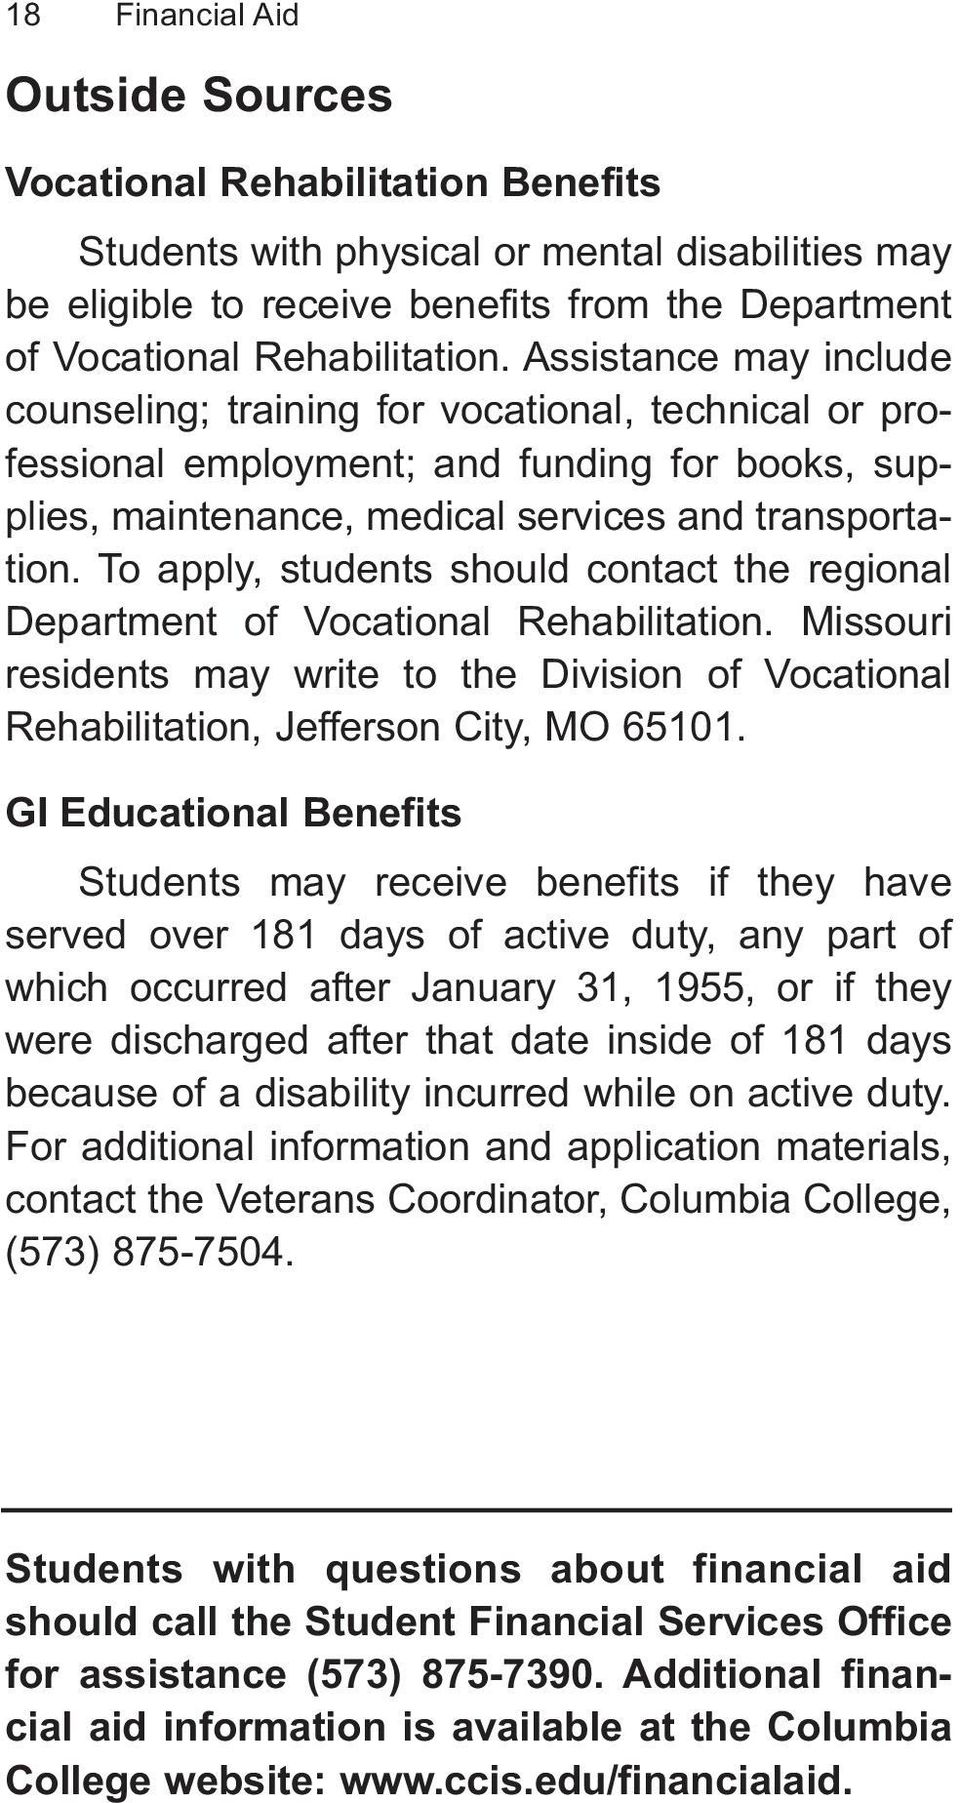 To apply, students should contact the regional Department of Vocational Rehabilitation. Missouri residents may write to the Division of Vocational Rehabilitation, Jefferson City, MO 65101.